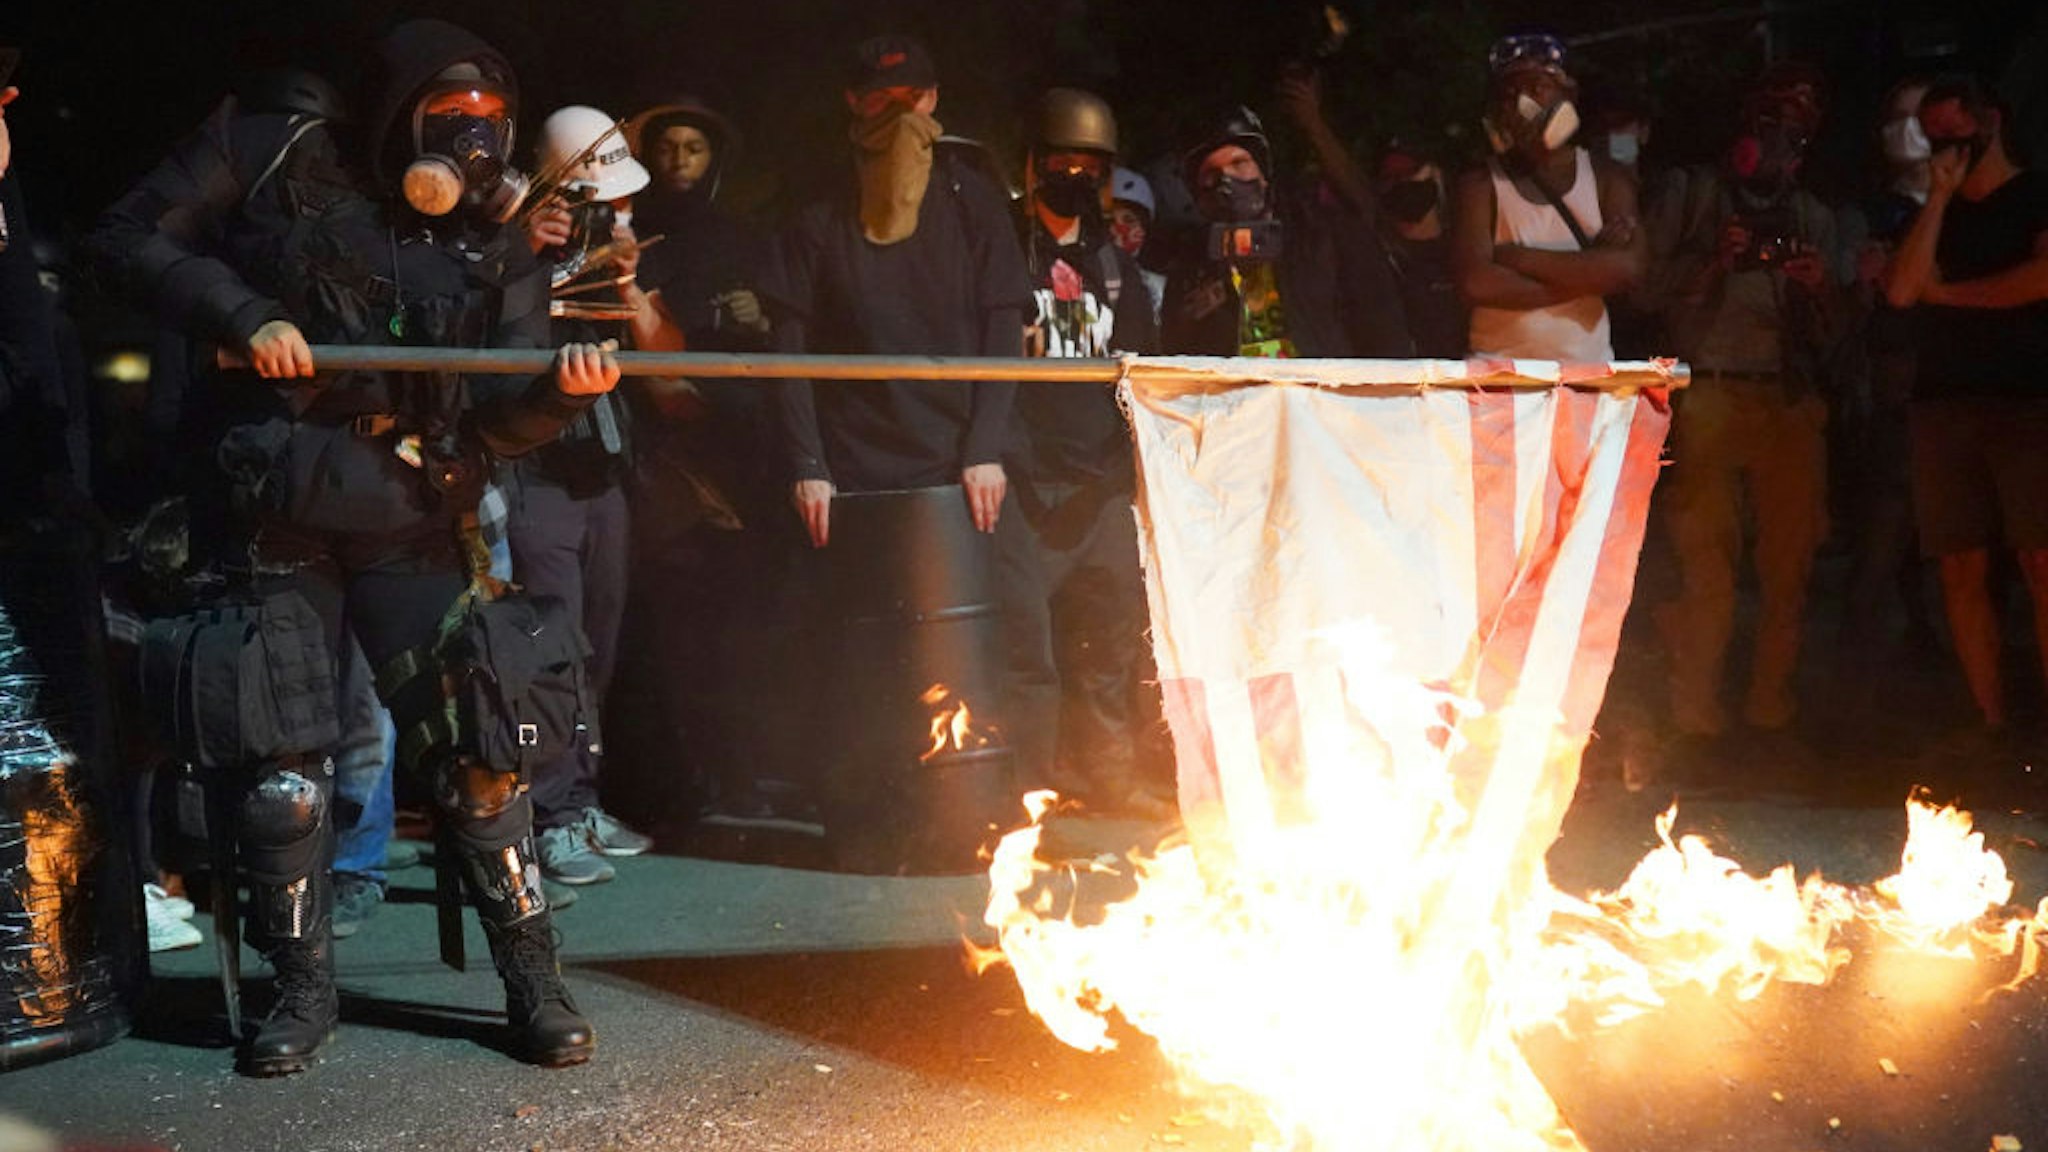 A protester burns an American flag in front of the Mark O. Hatfield U.S. Courthouse in the early morning on August 1, 2020 in Portland, Oregon. Friday was the second night in a row without police intervention, following weeks of clashes between federal officers and protesters in Portland. (Photo by Nathan Howard/Getty Images)